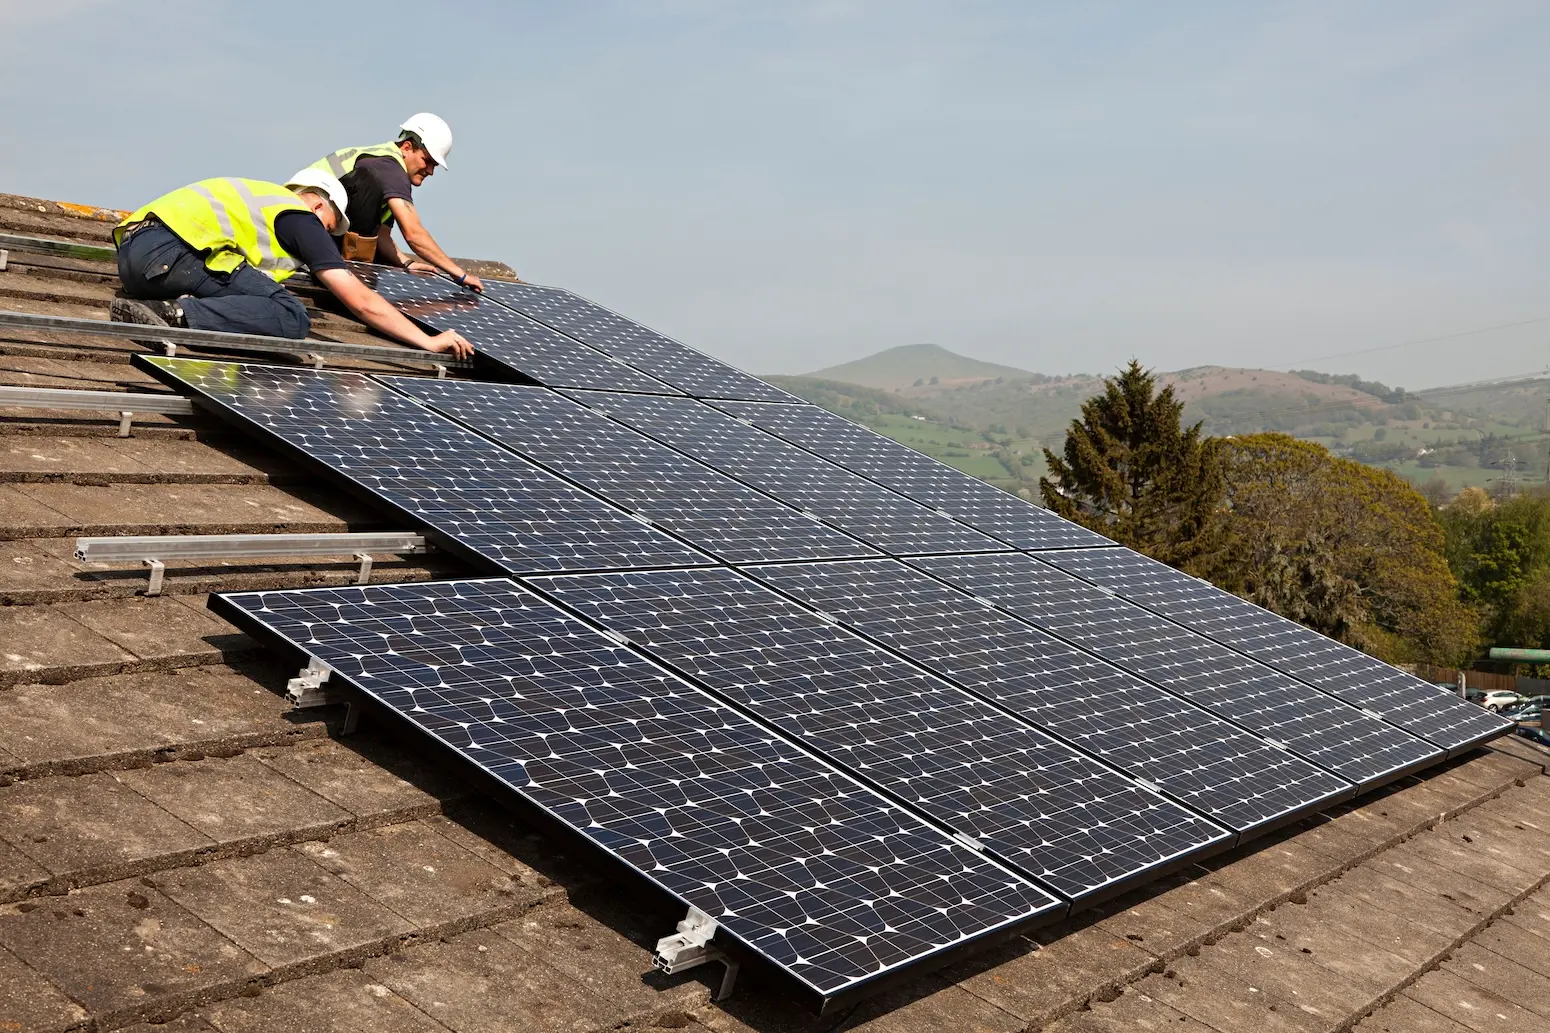 solar energy uk statistics - What is the solar energy record in the UK